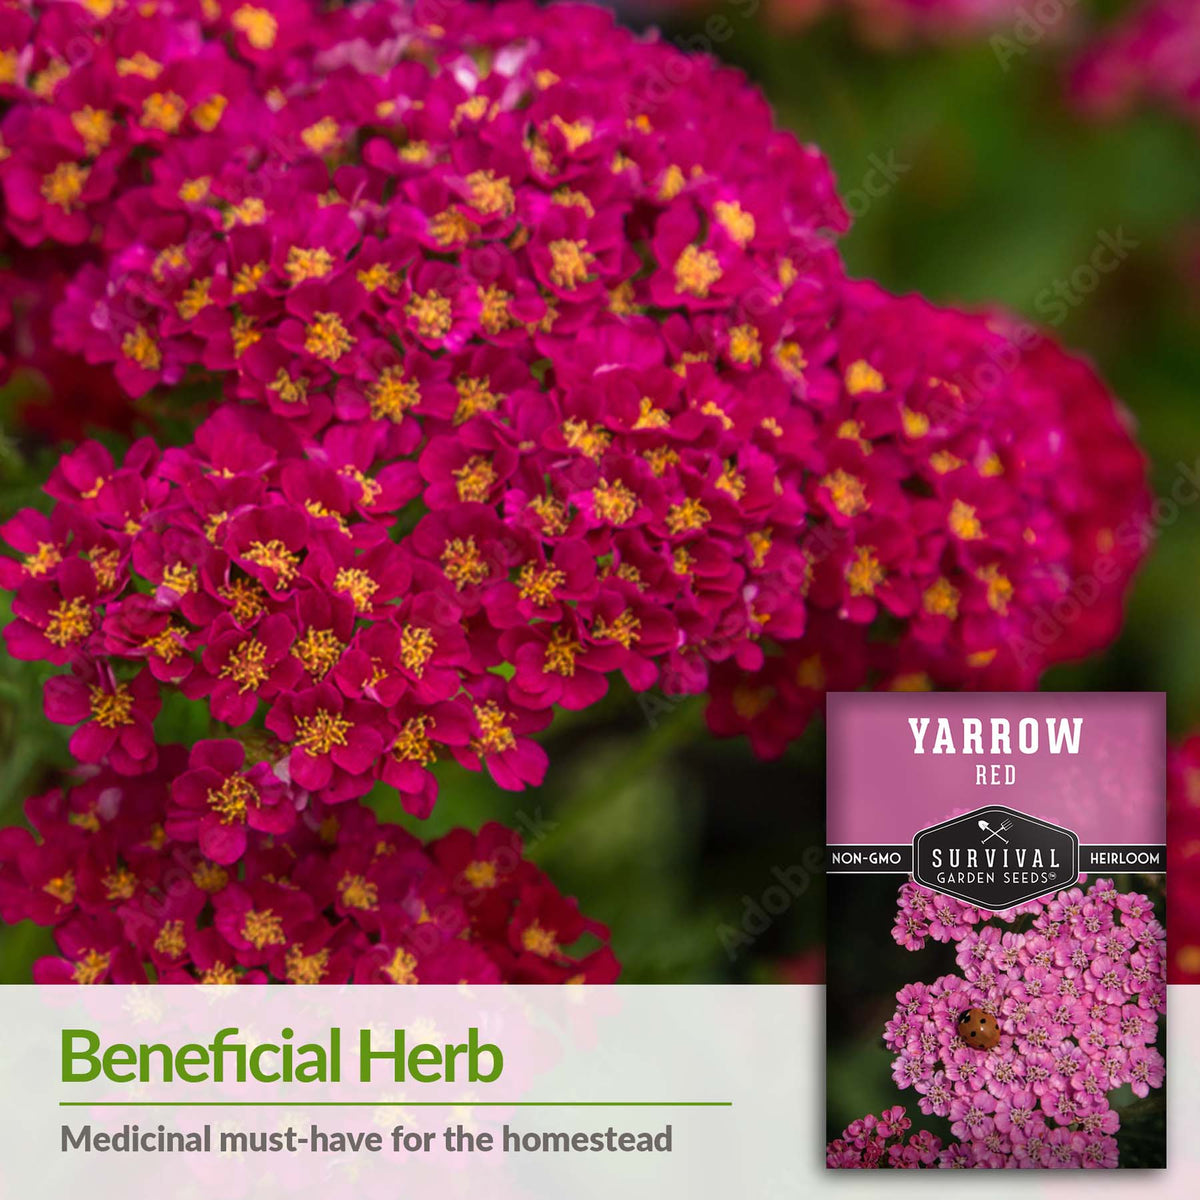 Red Yarrow is a beneficial medicinal herb